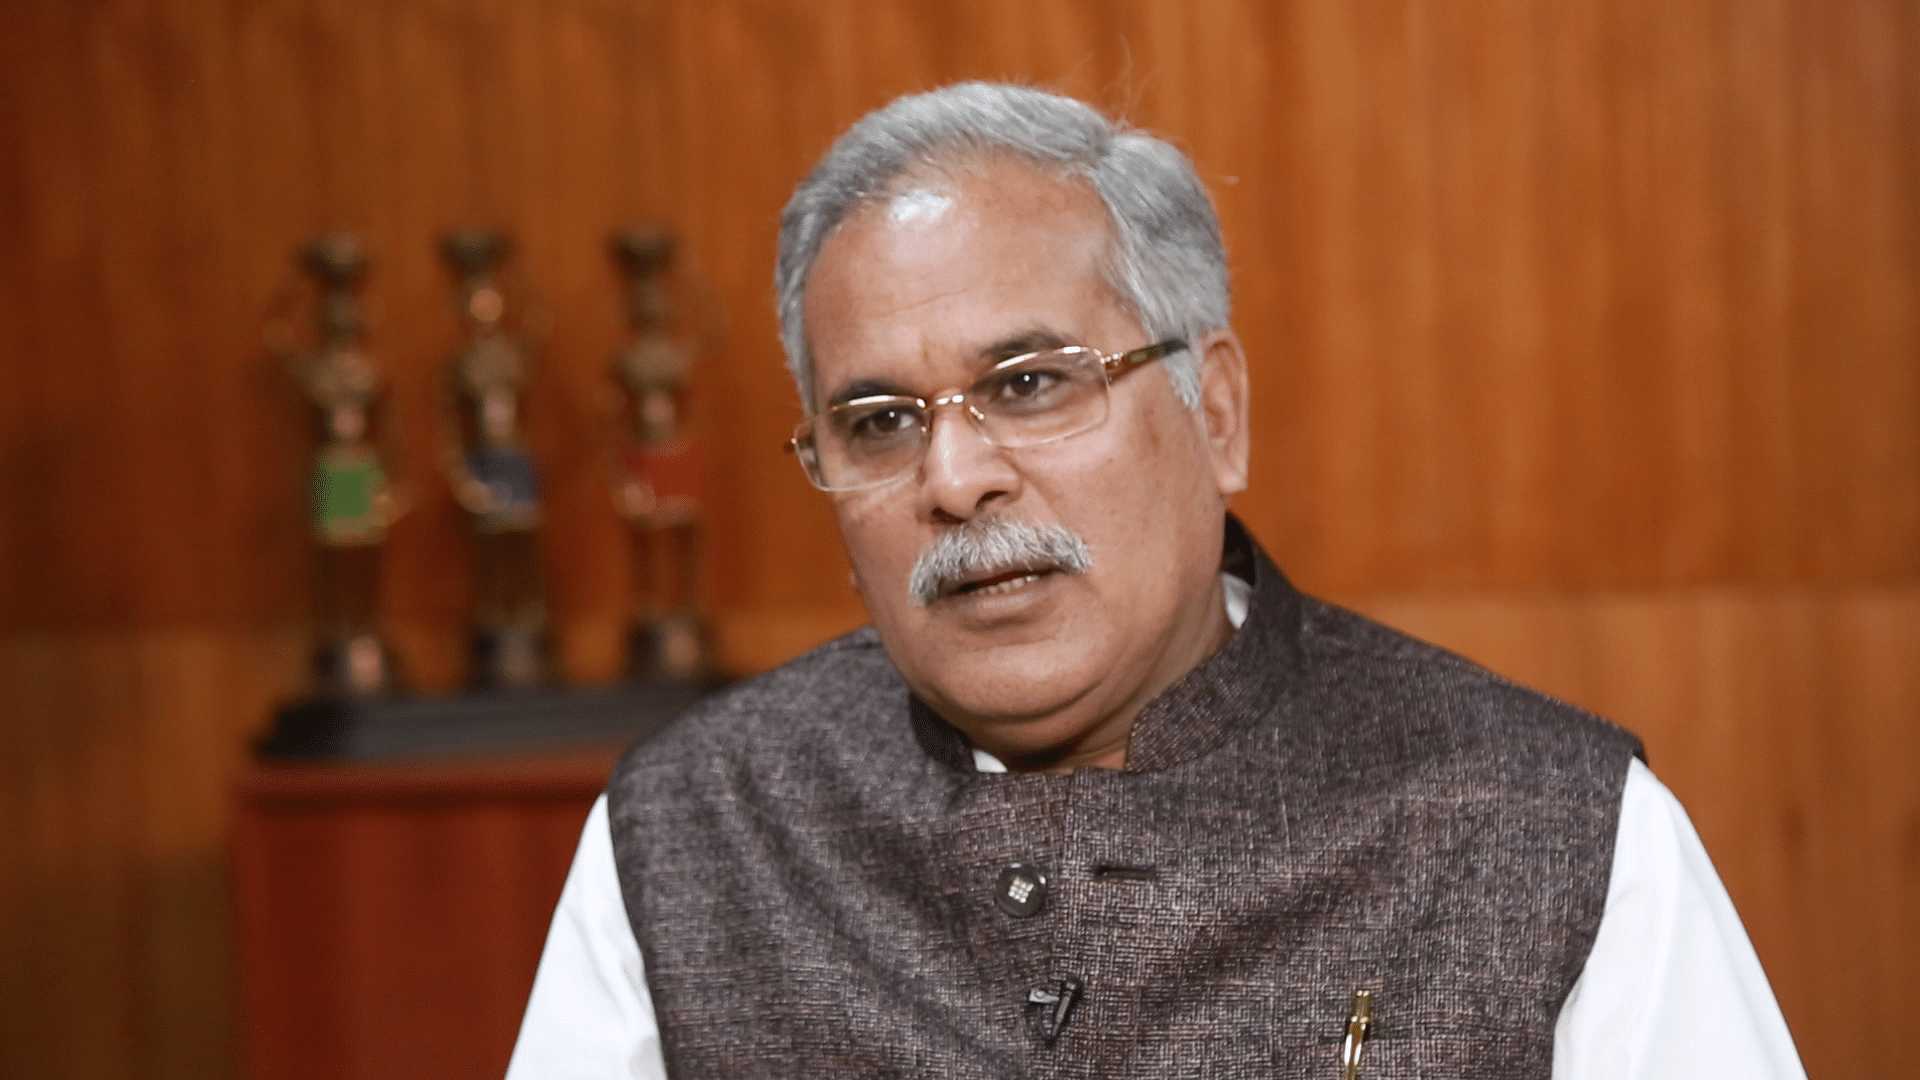 <div class="paragraphs"><p>Chhattisgarh Chief Minister Bhupesh Baghel said that If the Congress high command asks him to step down as chief minister, it will be so. Image used for representational purposes.&nbsp;</p><p><br></p></div>